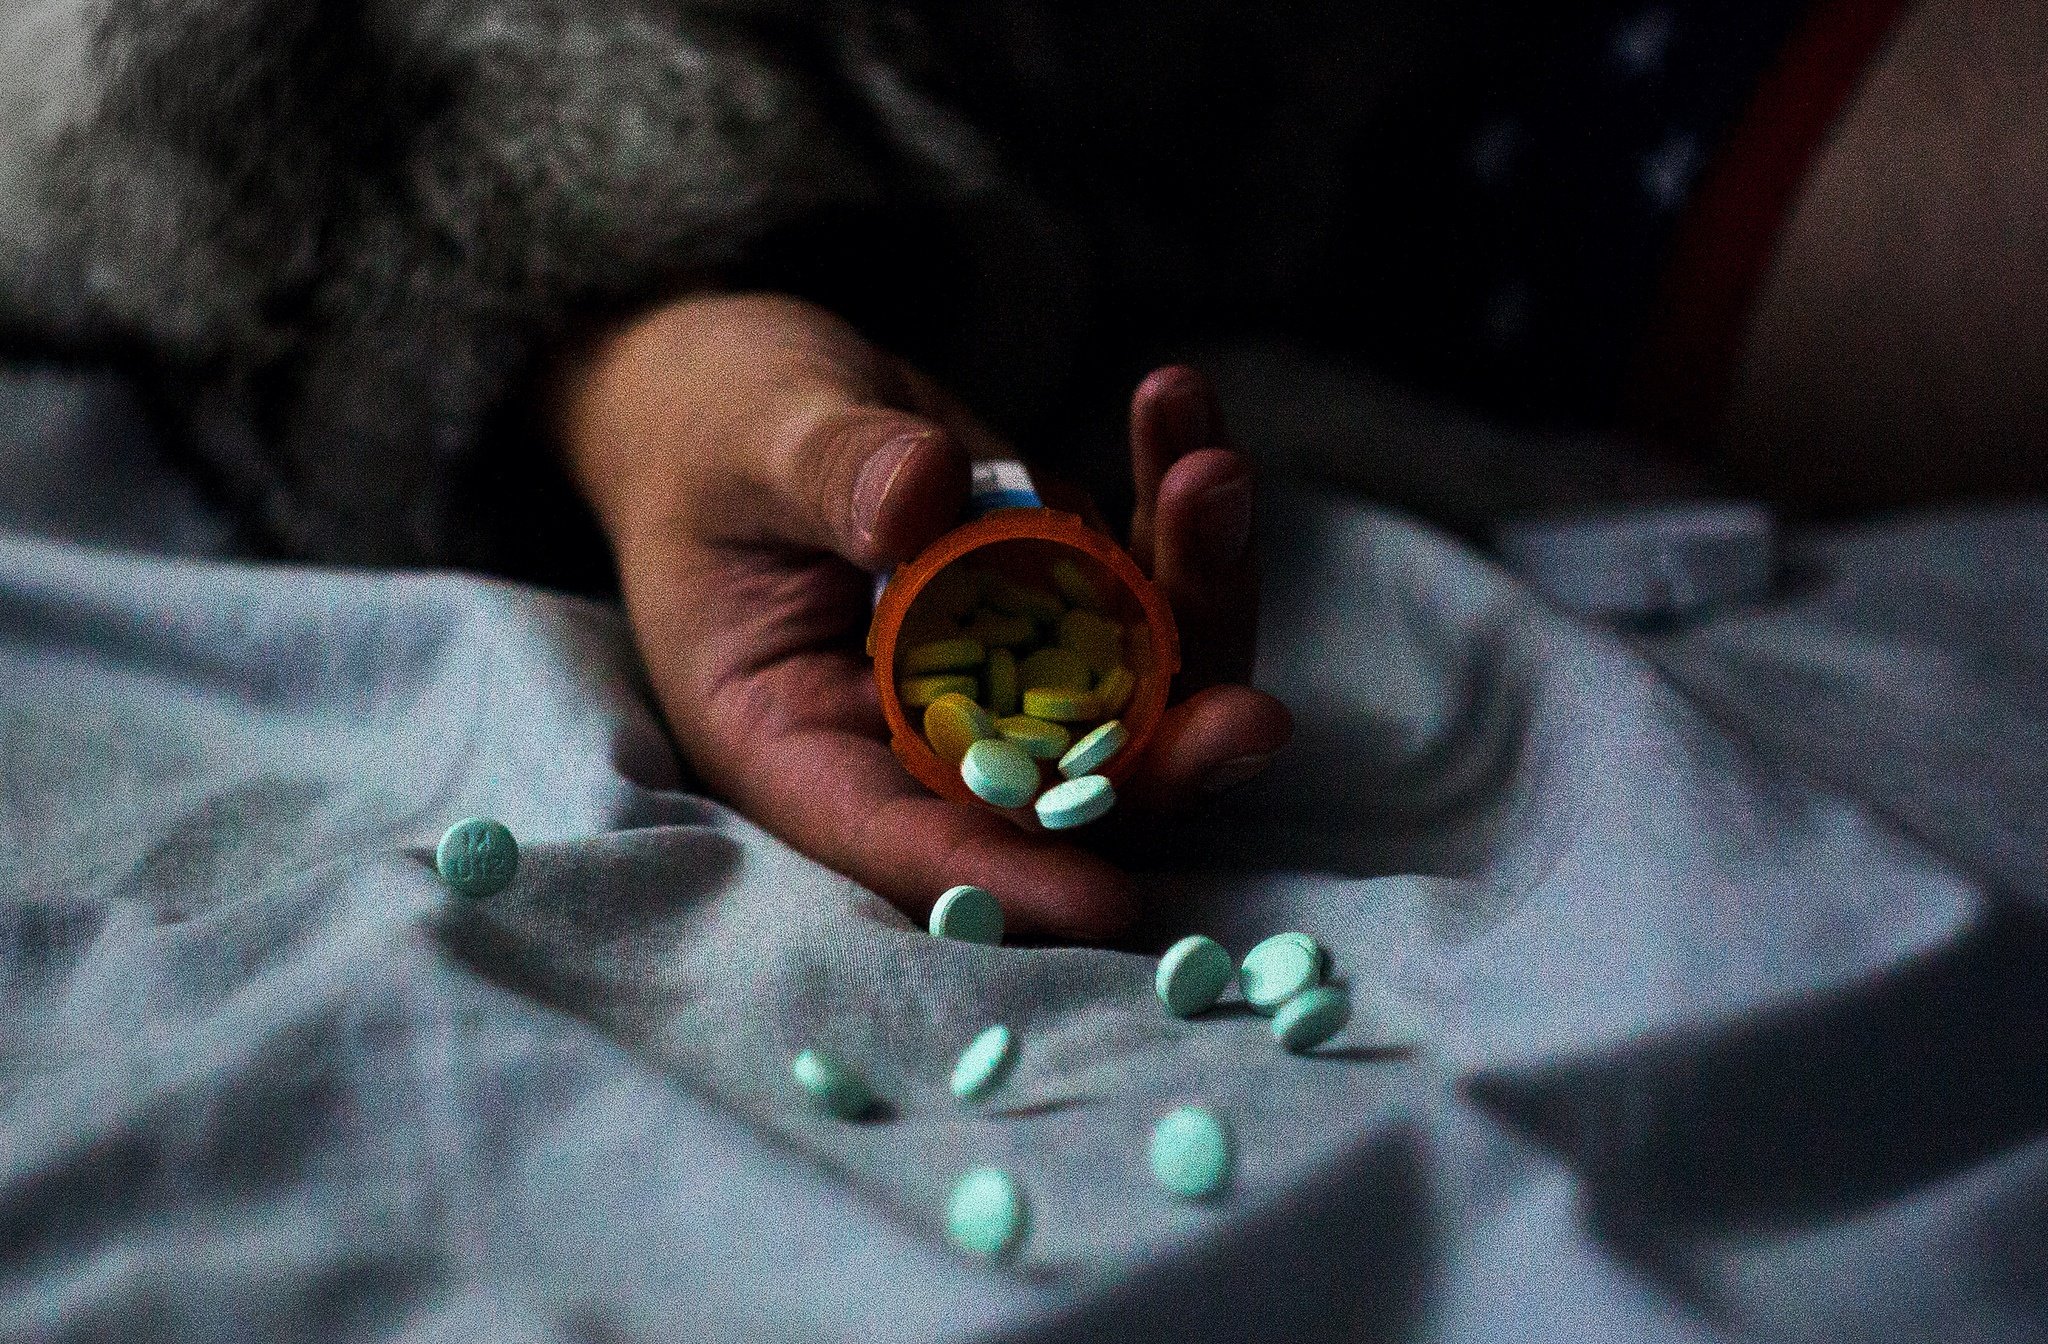 5 Things That Happen When You Date a Drug Addict.